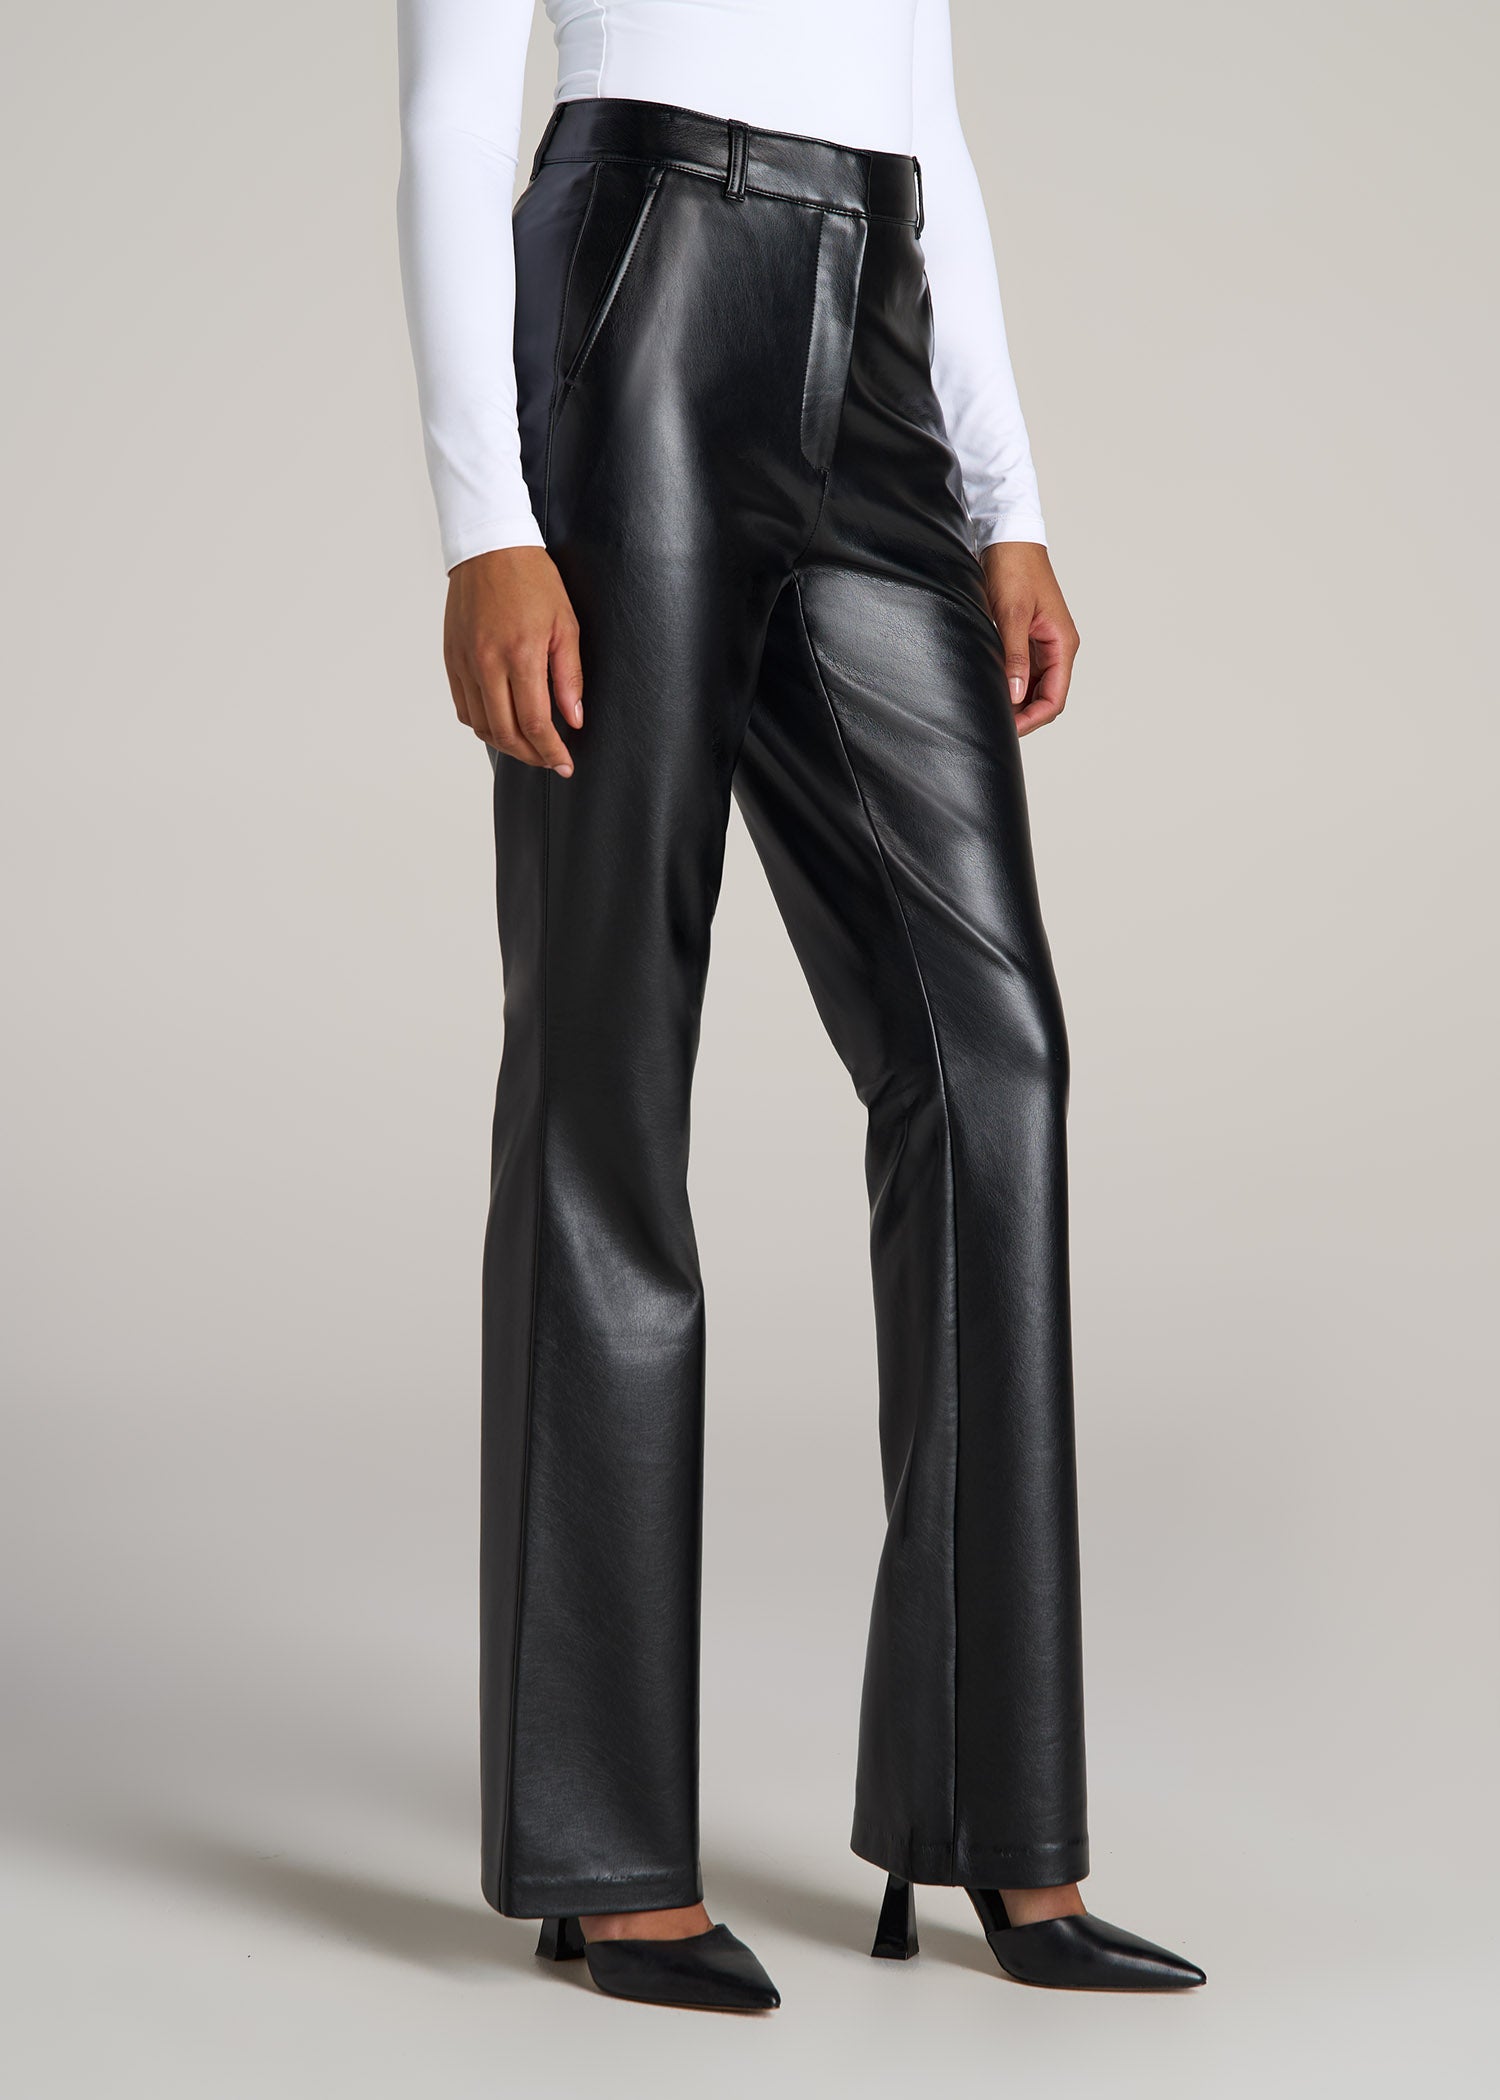 American-Tall-Women-High-Rise-Flare-Faux-Leather-Pant-Black-side